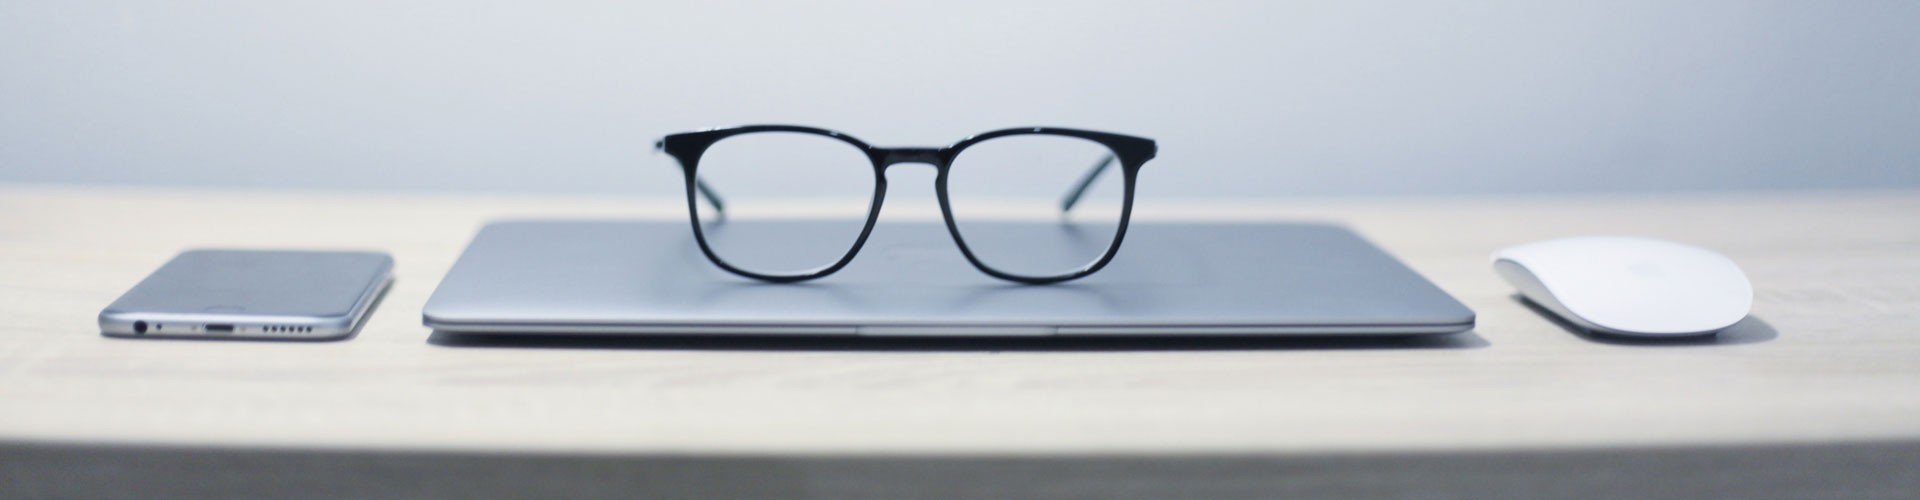 pair of glasses on top of closed laptop